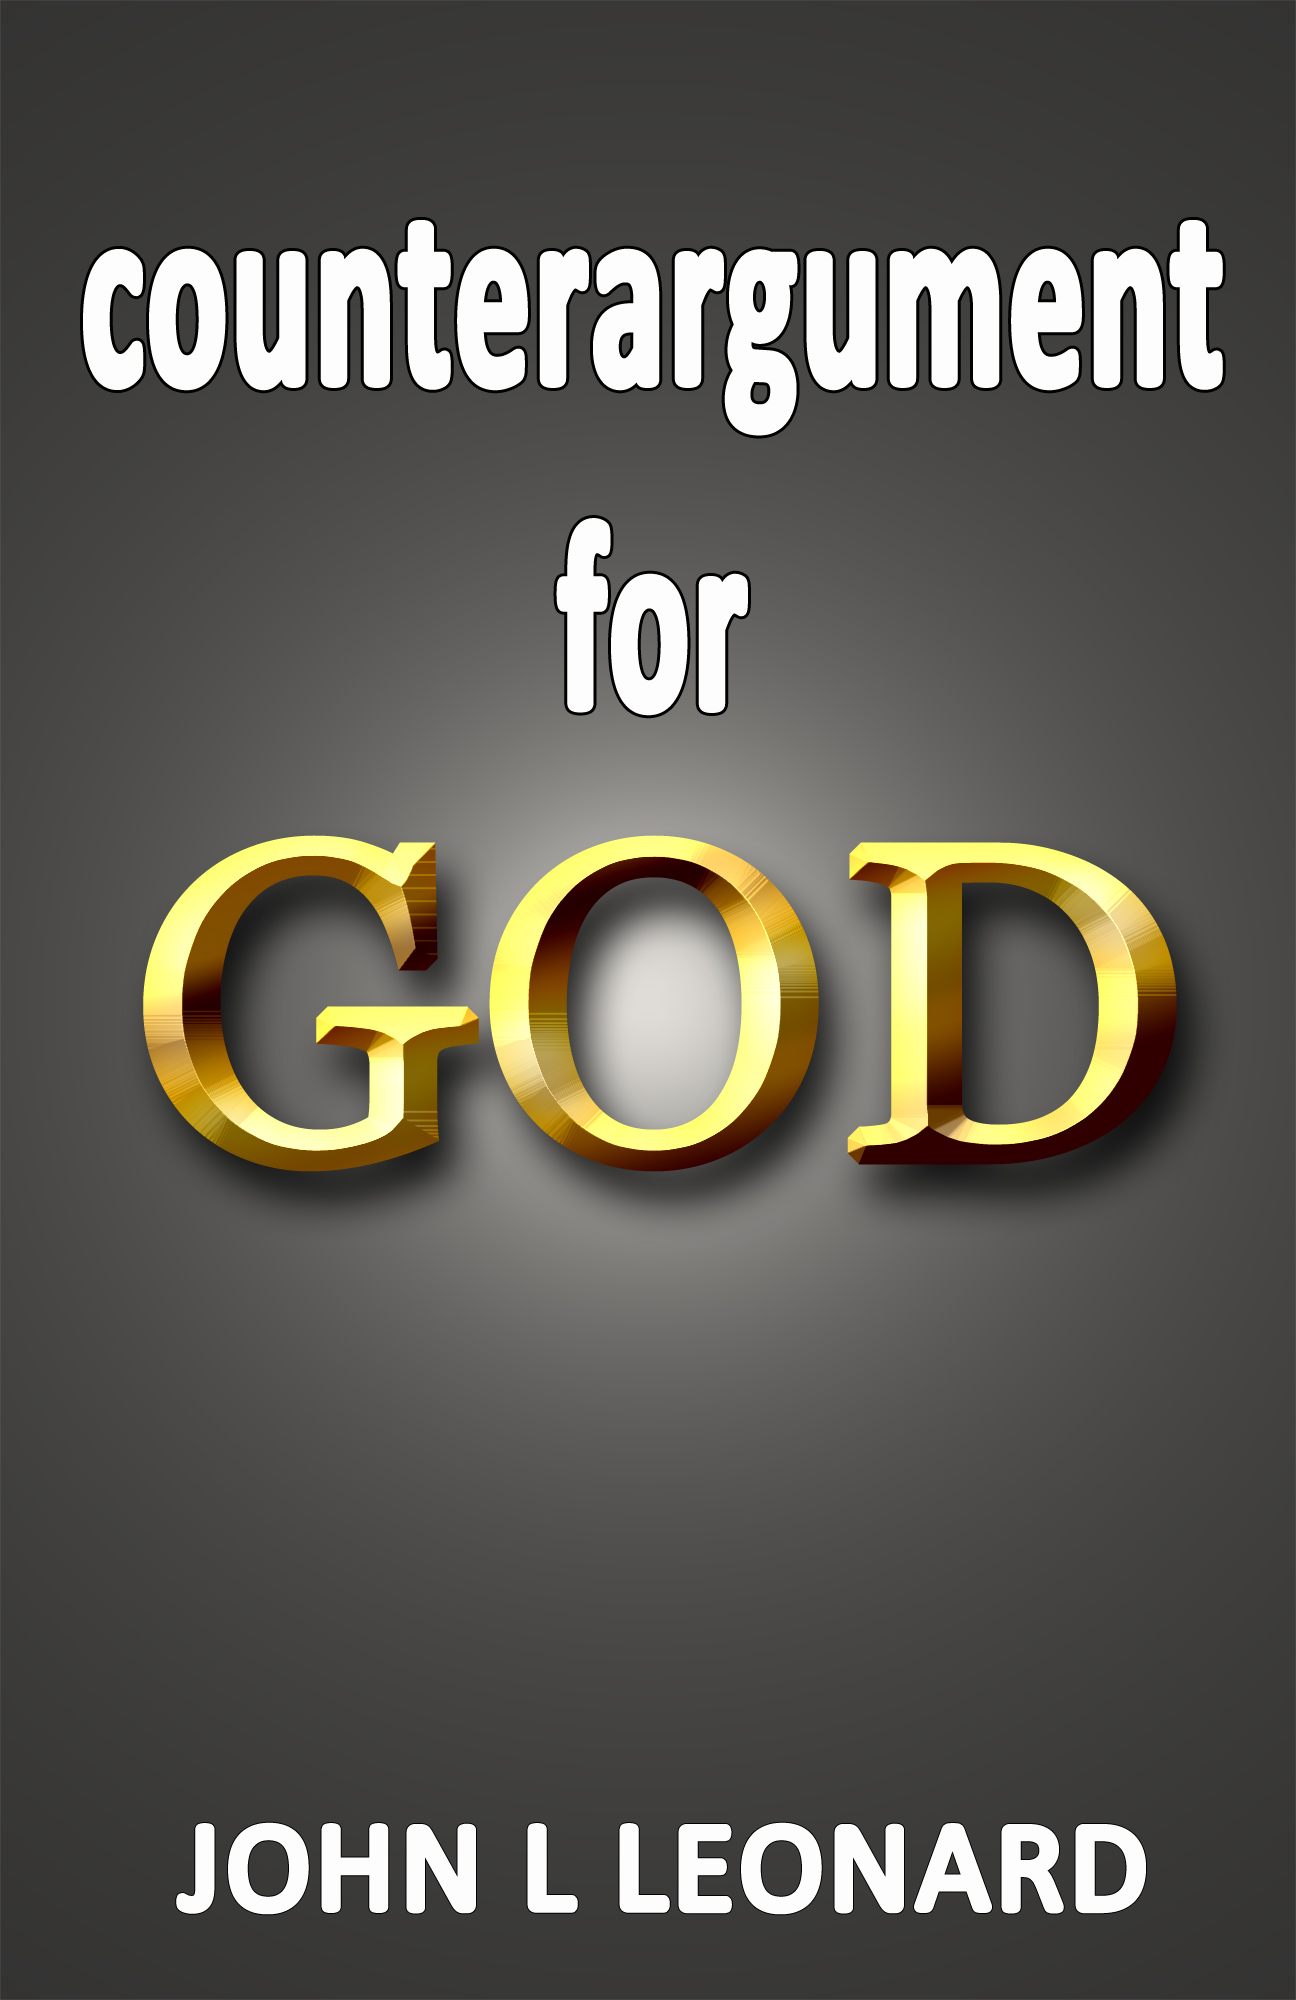 Counterargument for God